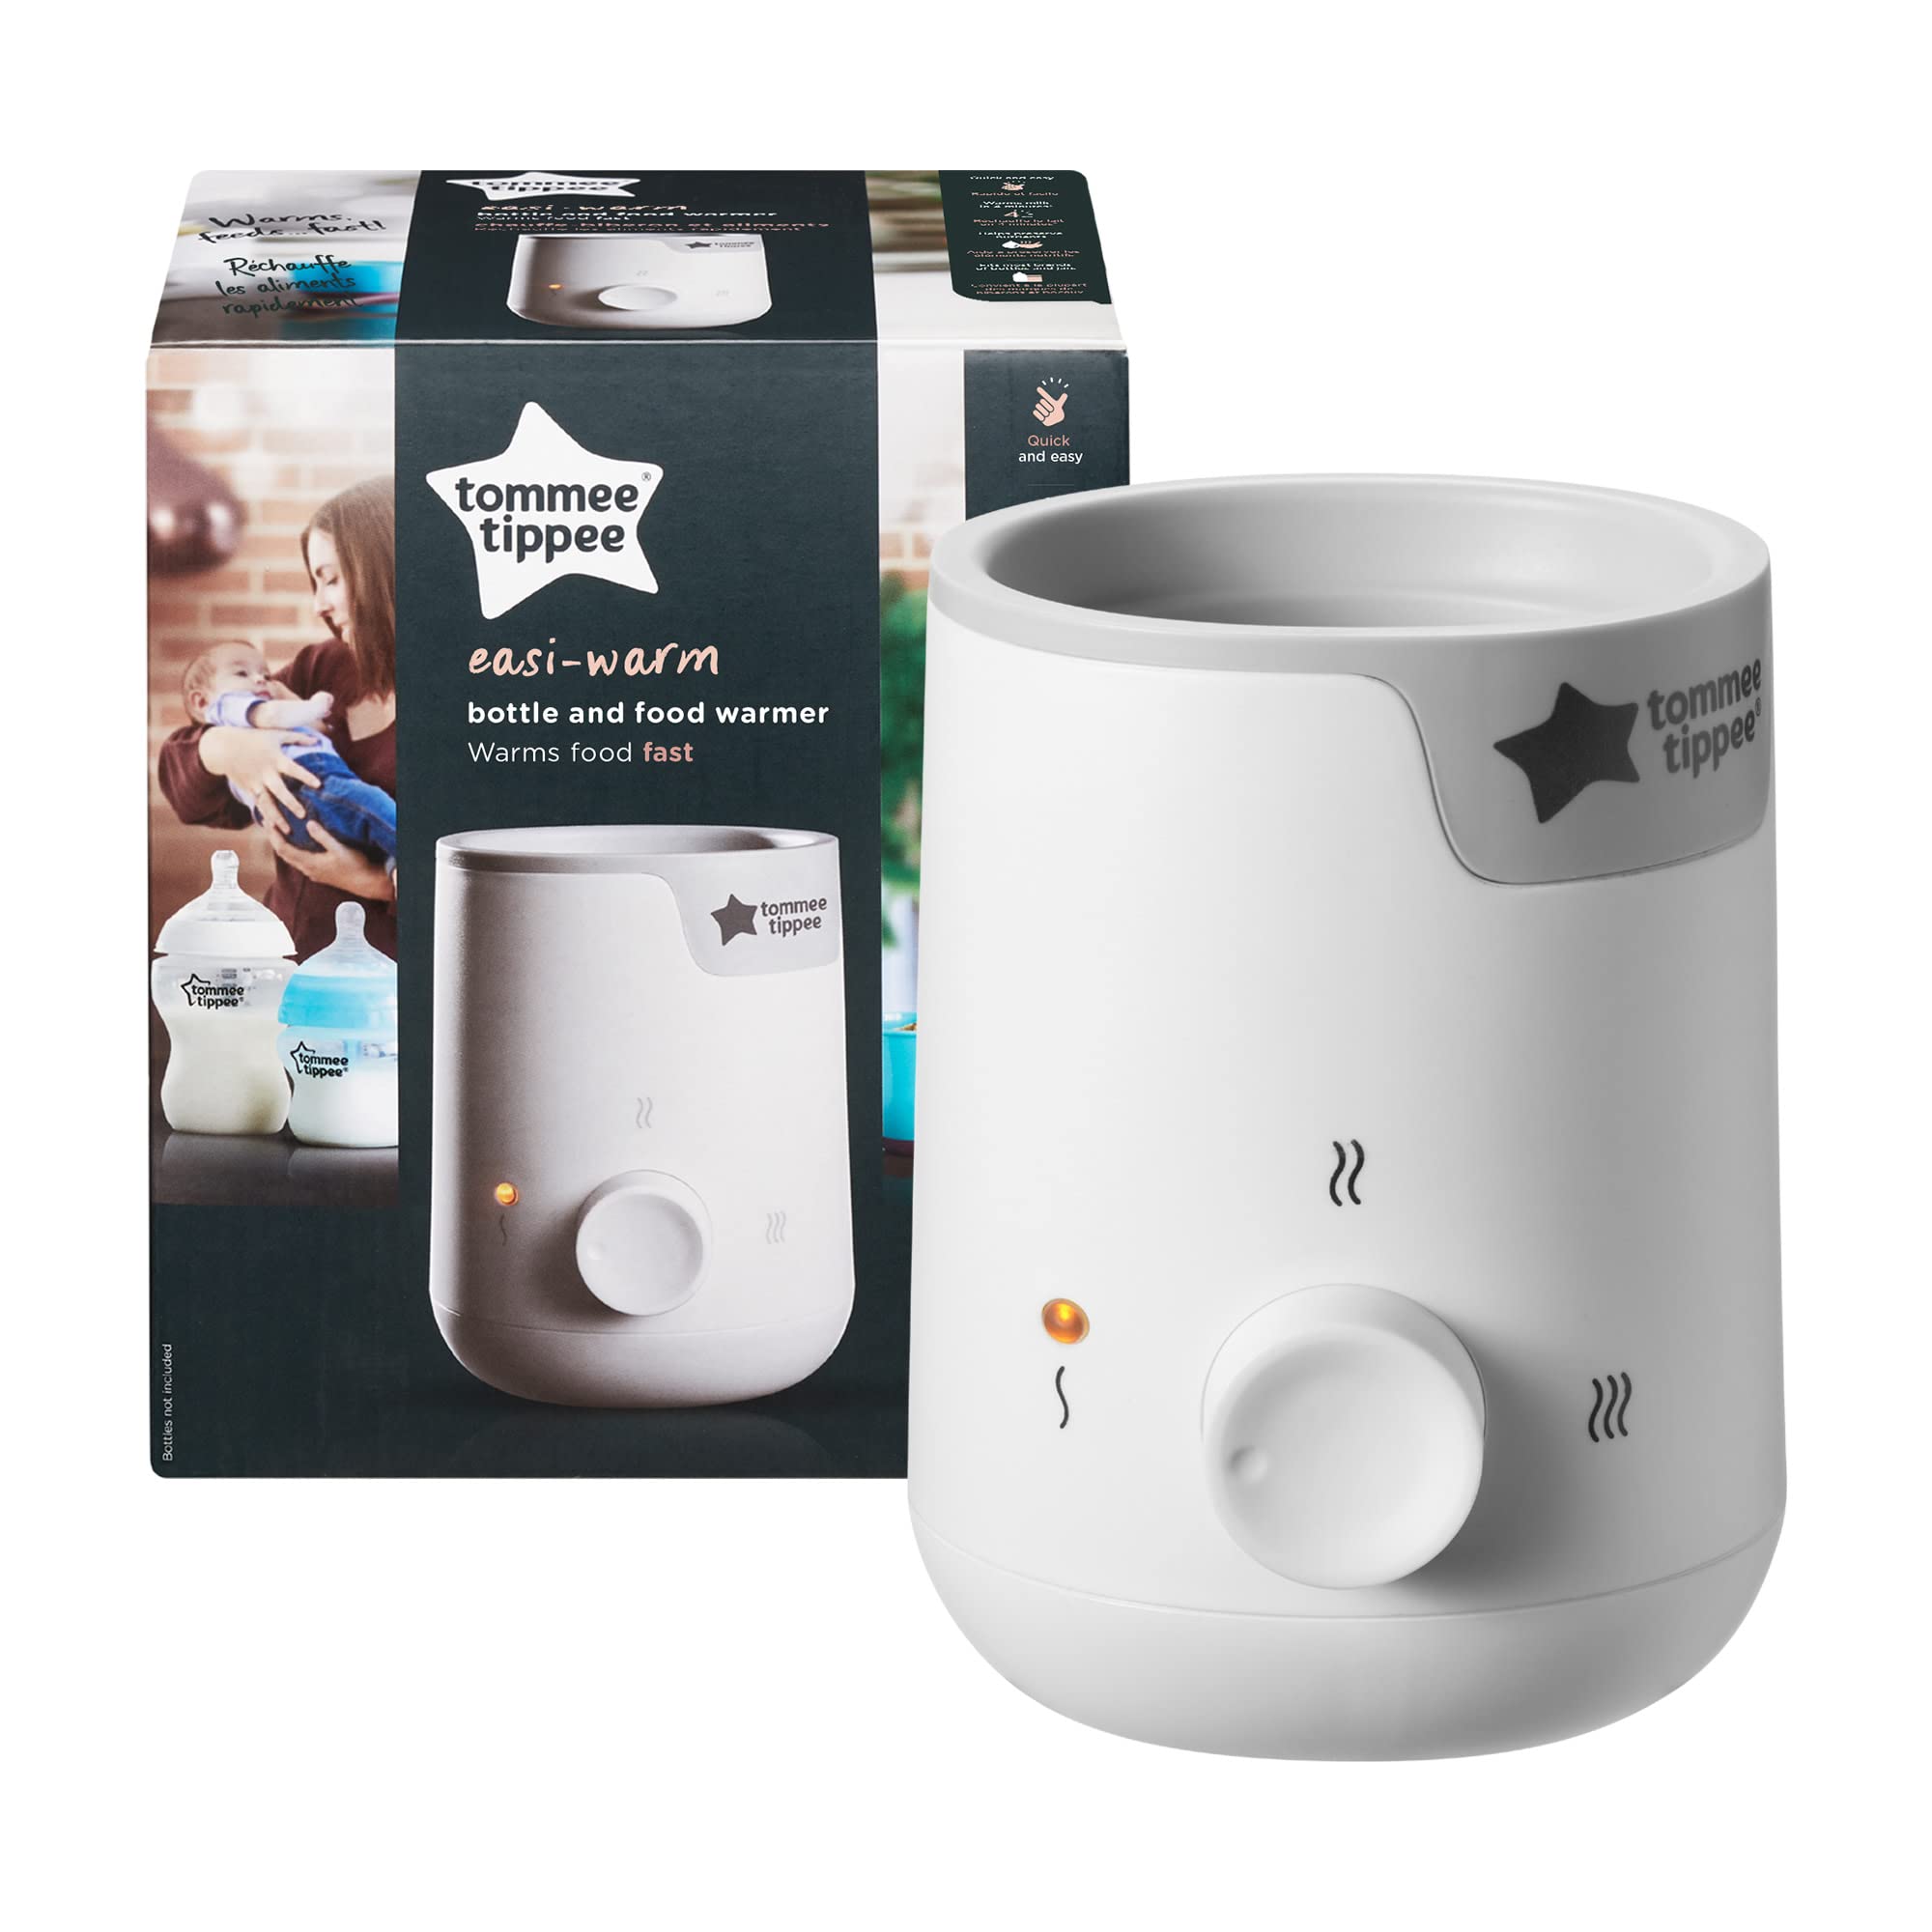 Tommee Tippee 3-in-1 Advanced Electric Bottle and Food Pouch Warmer, Warms Feeds Fast, White